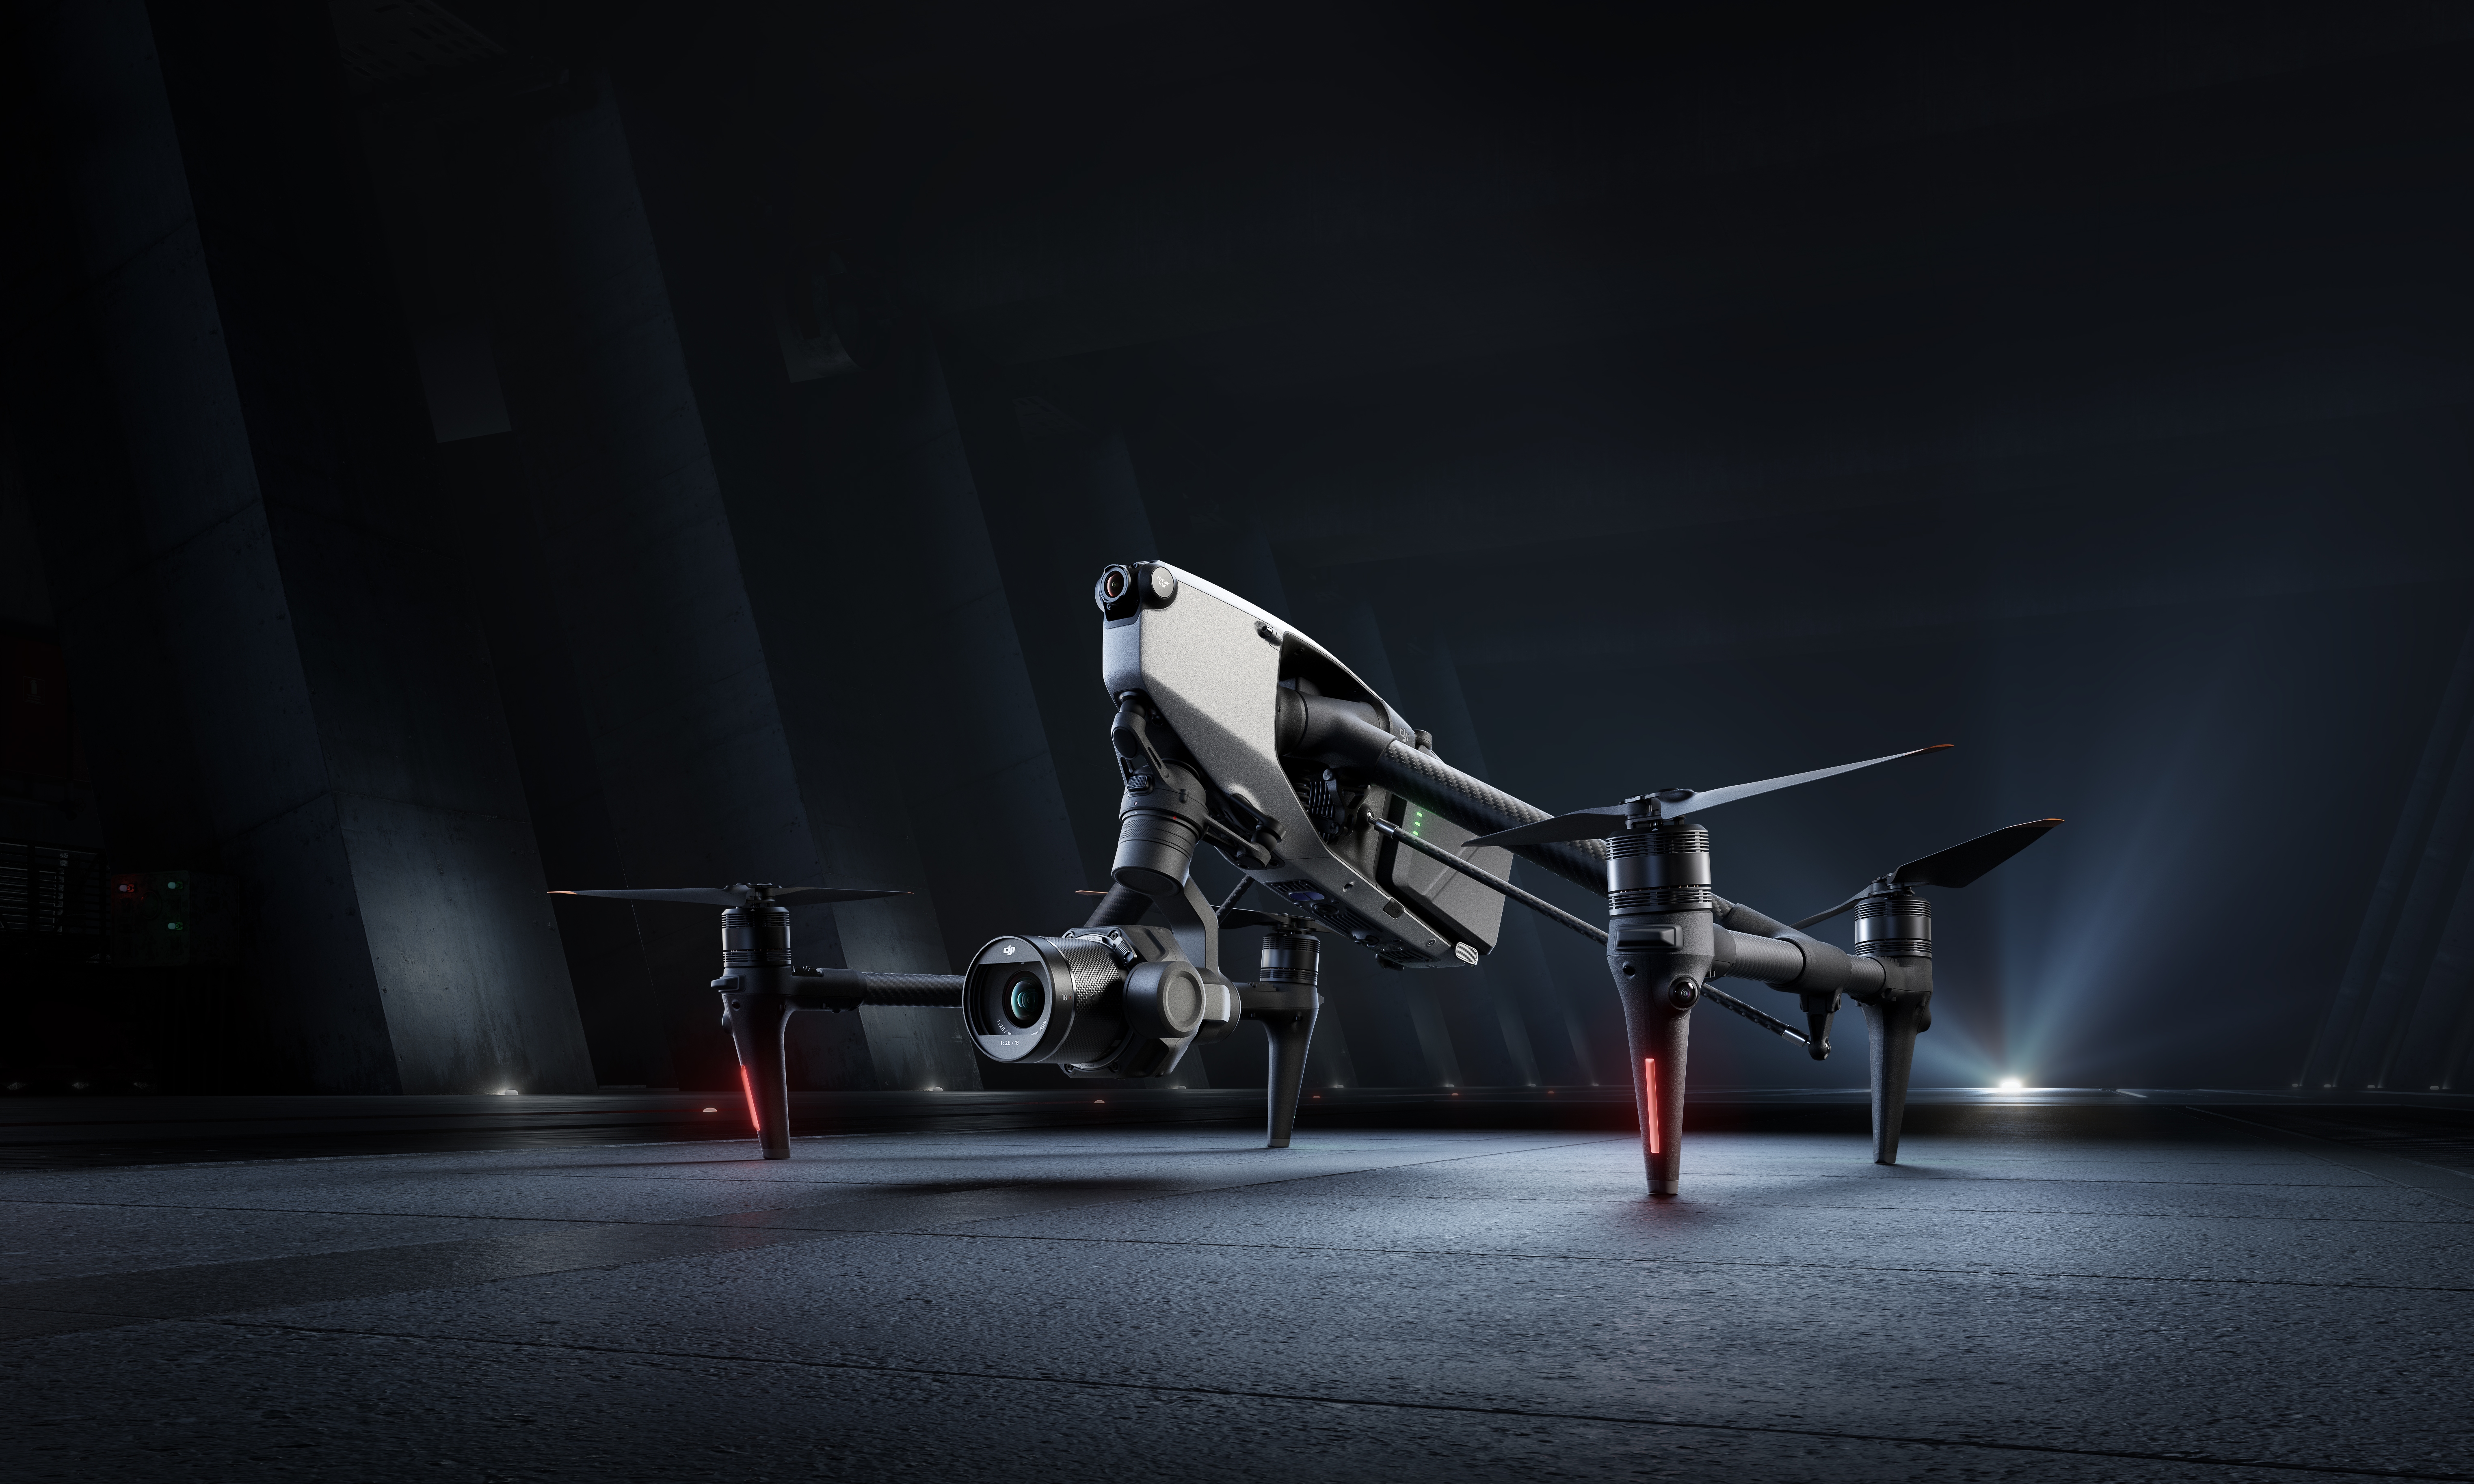 Marketing photo of the DJI Inspire 3 drone, sitting in dramatic lighting on a gray surface.